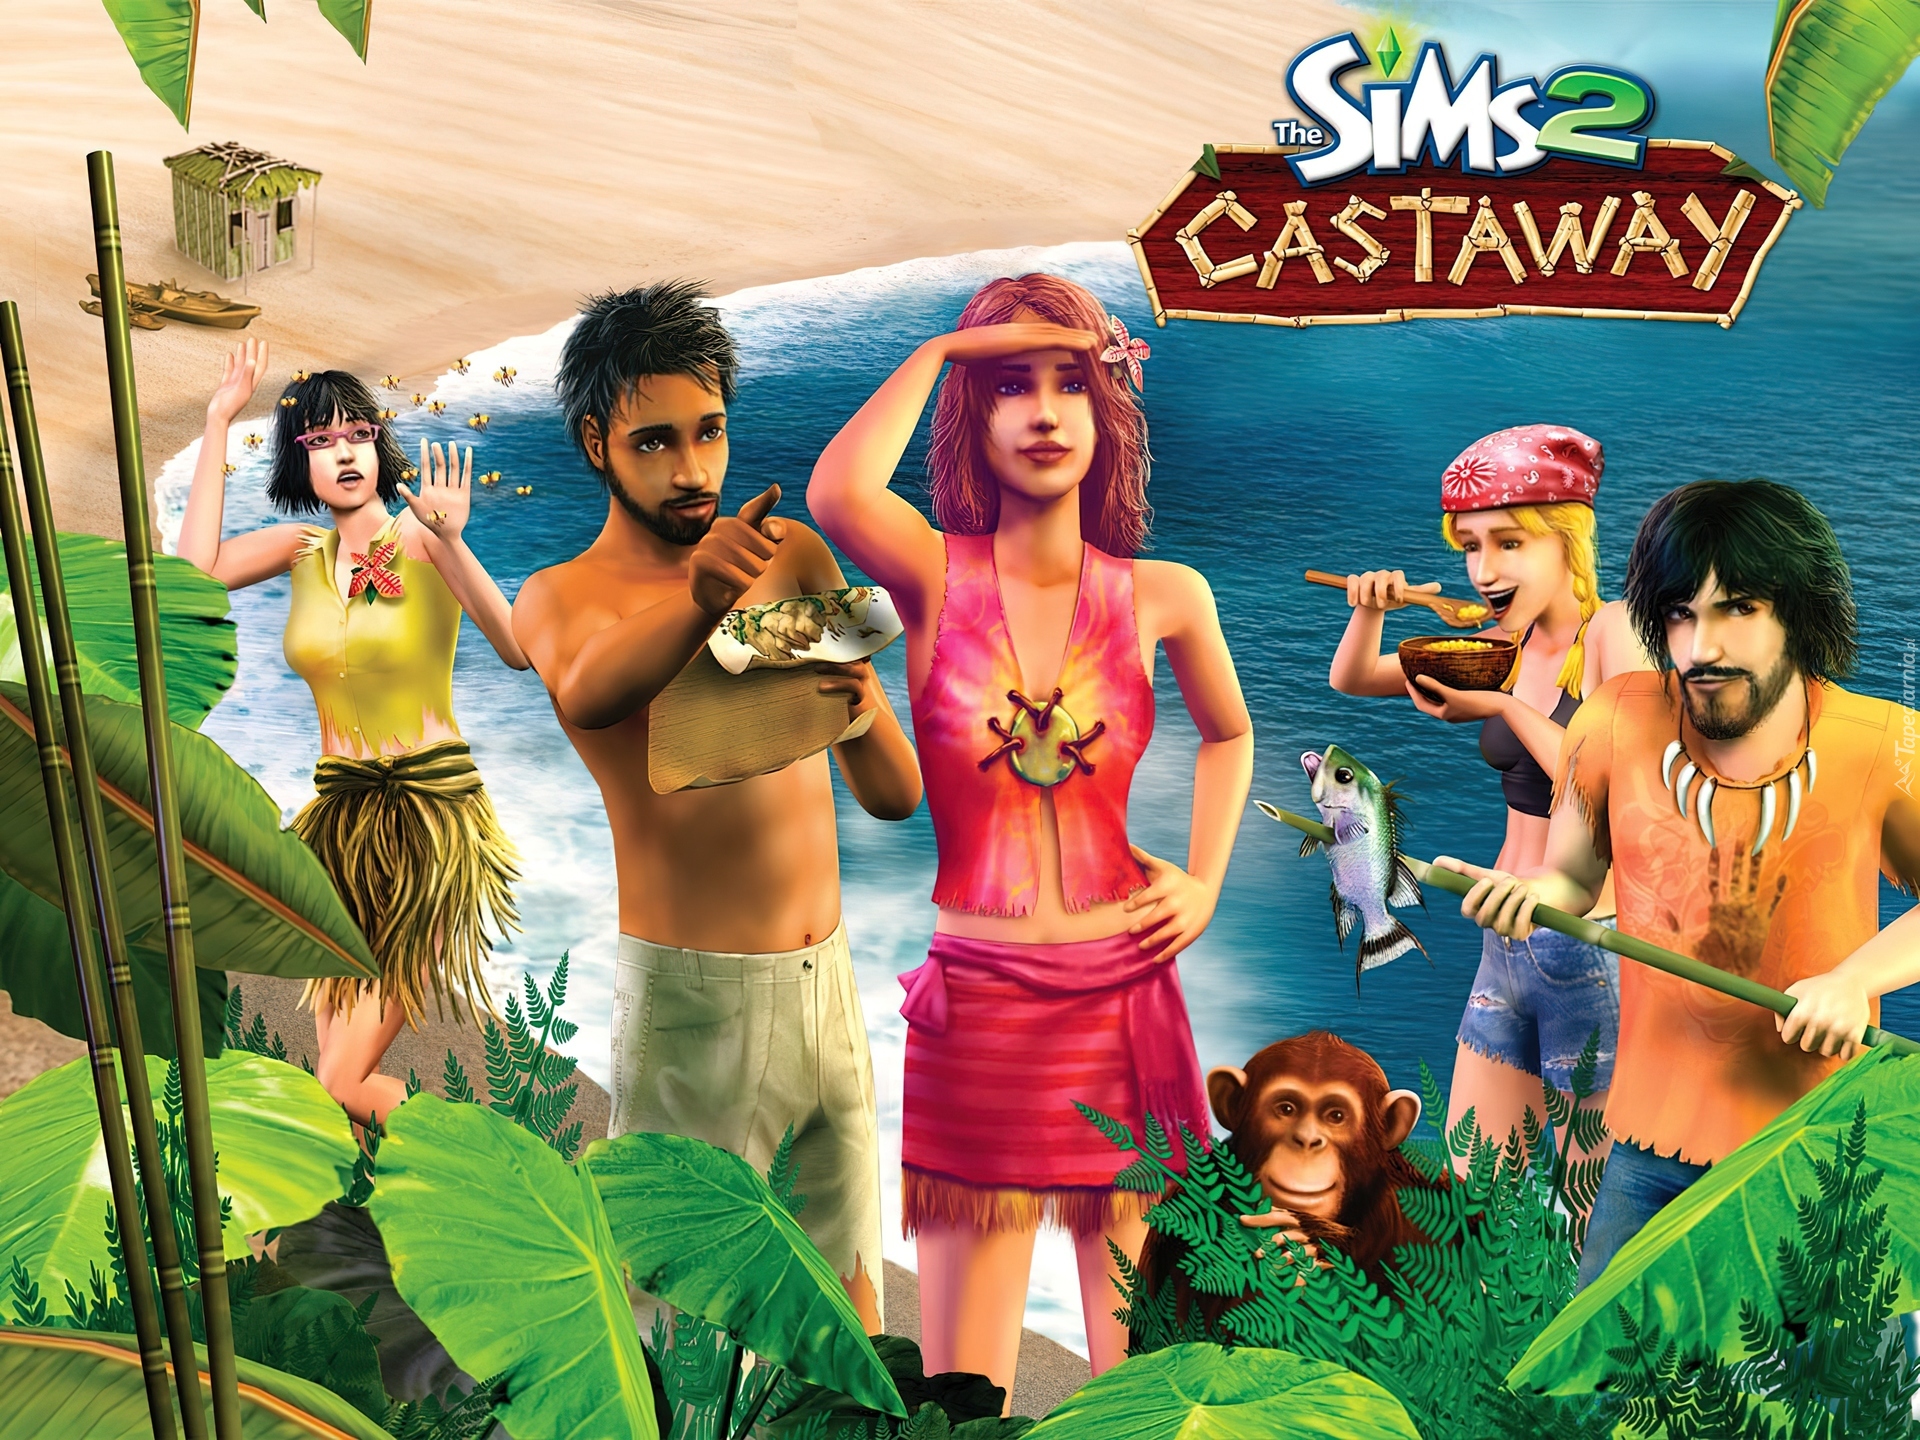 dolphin the sims 2 castaway